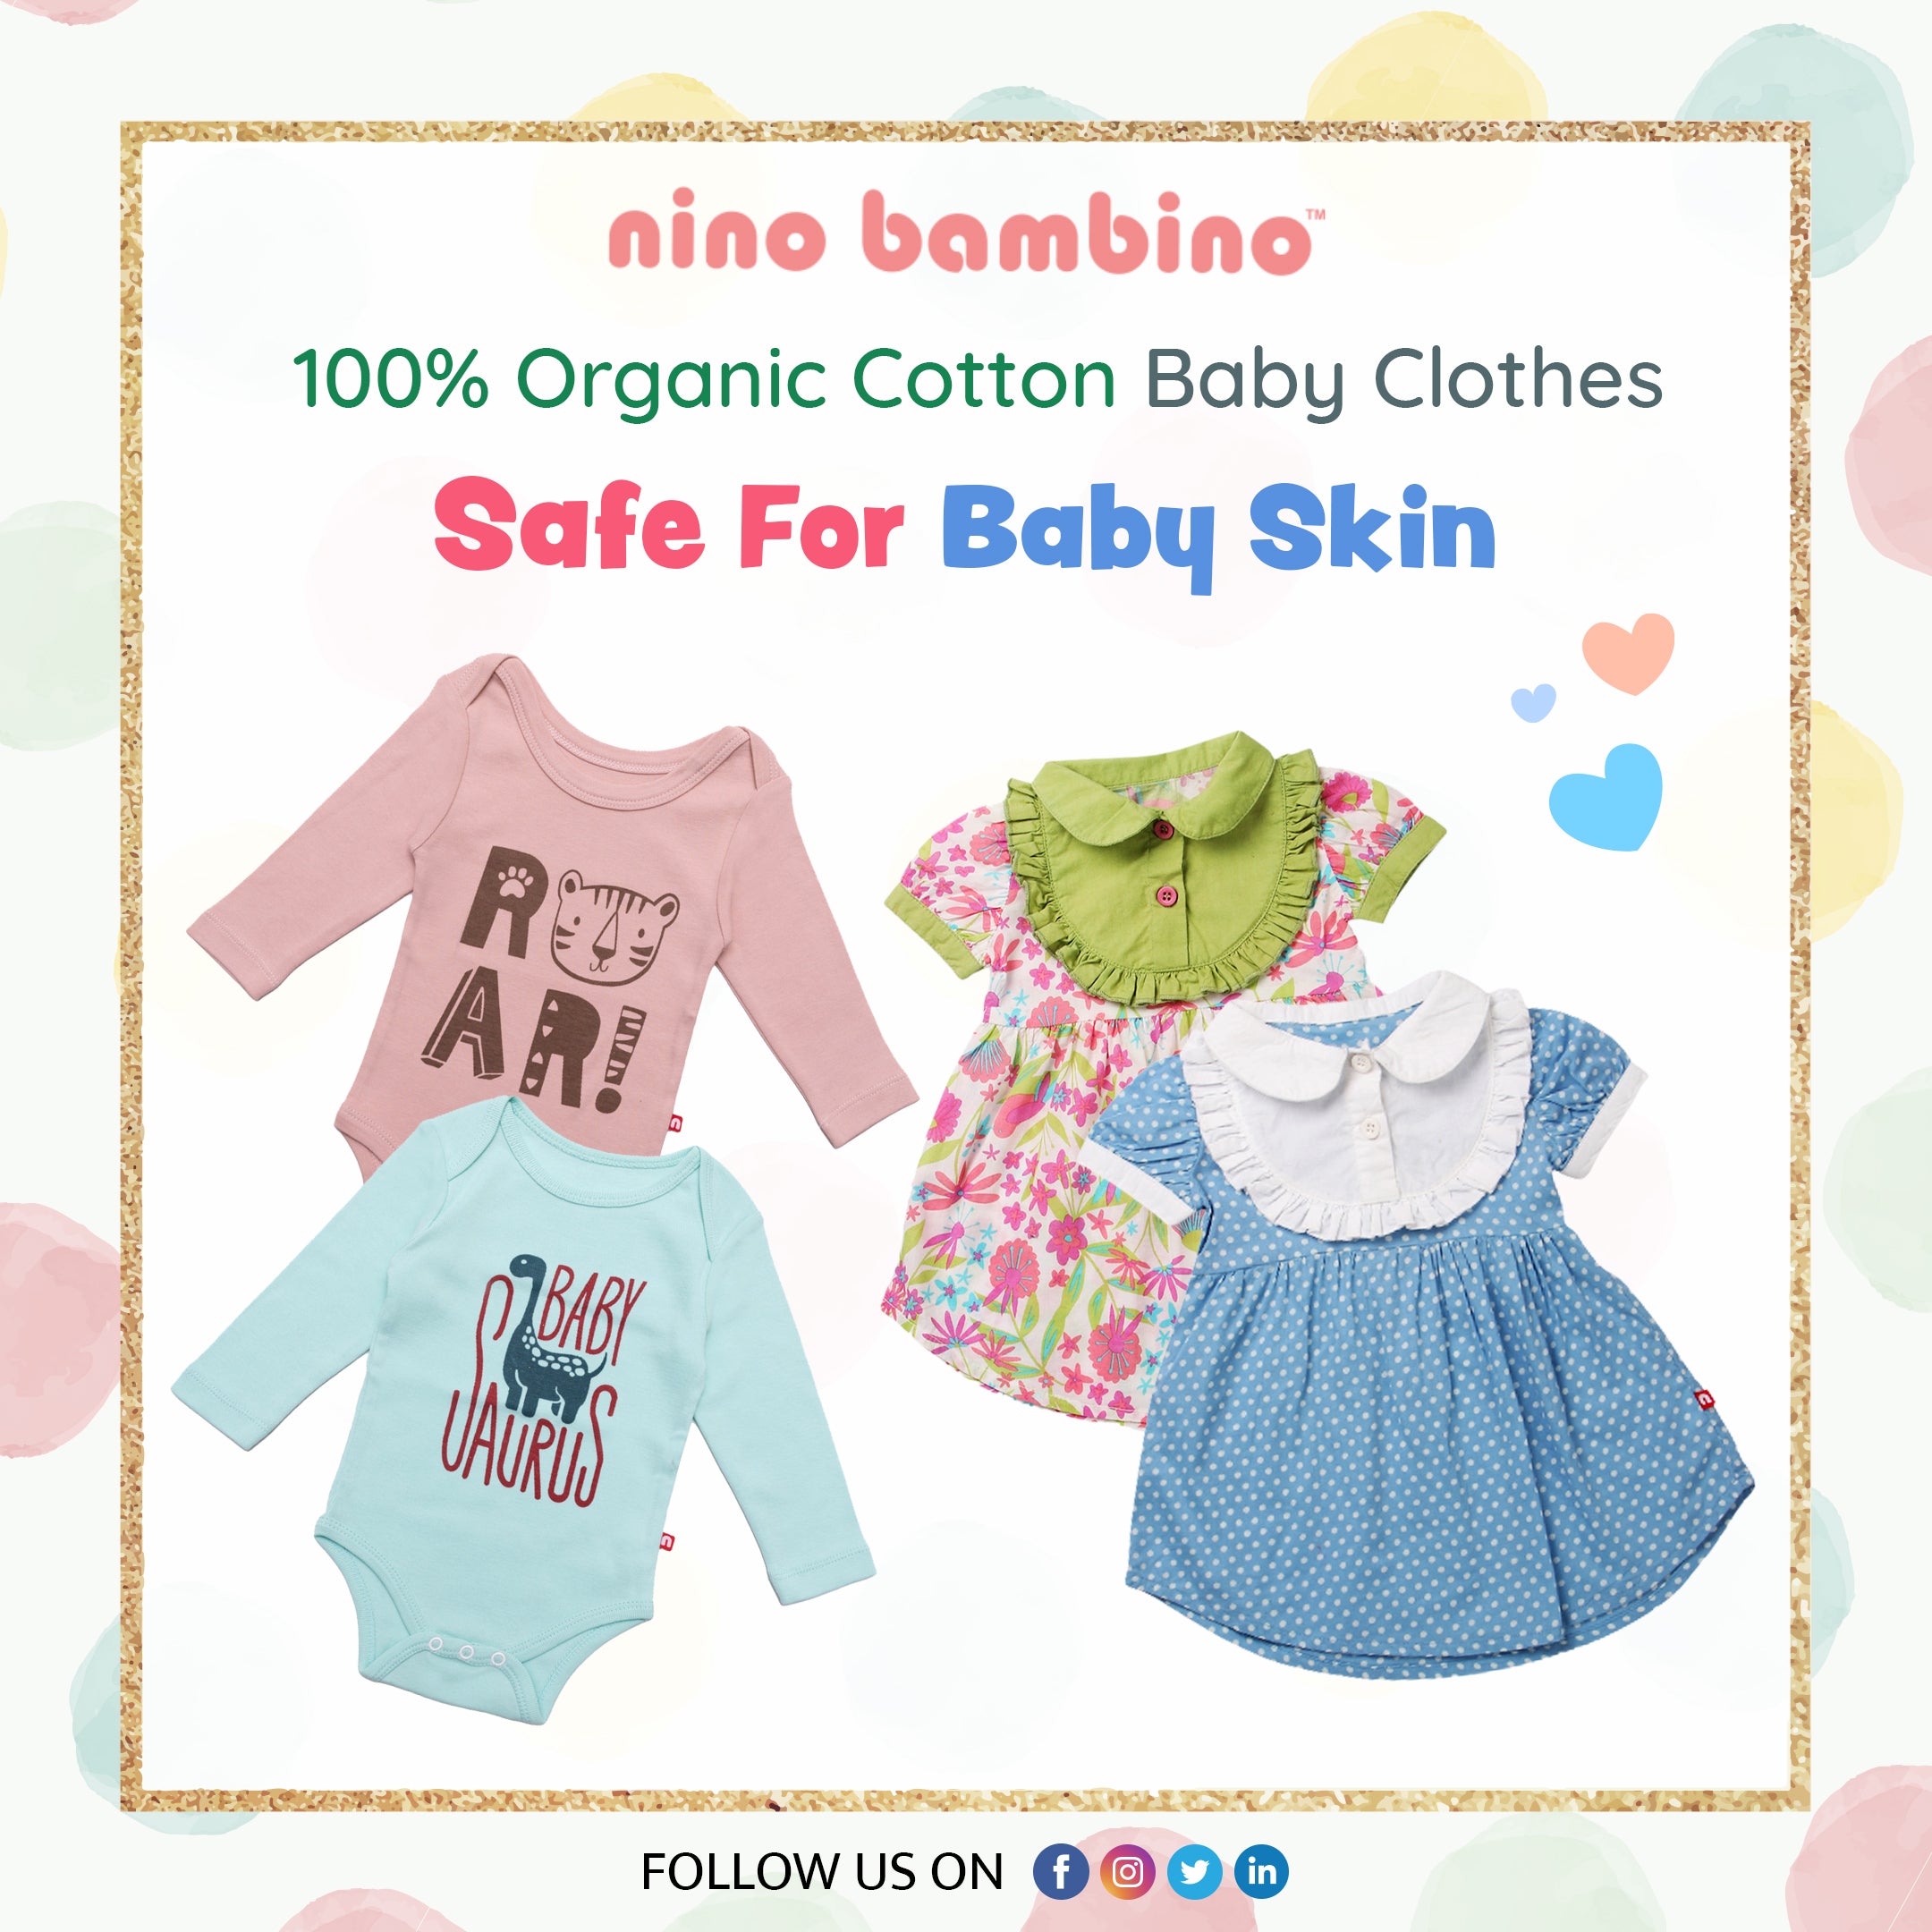 Where to Find the Correct Baby Clothes?